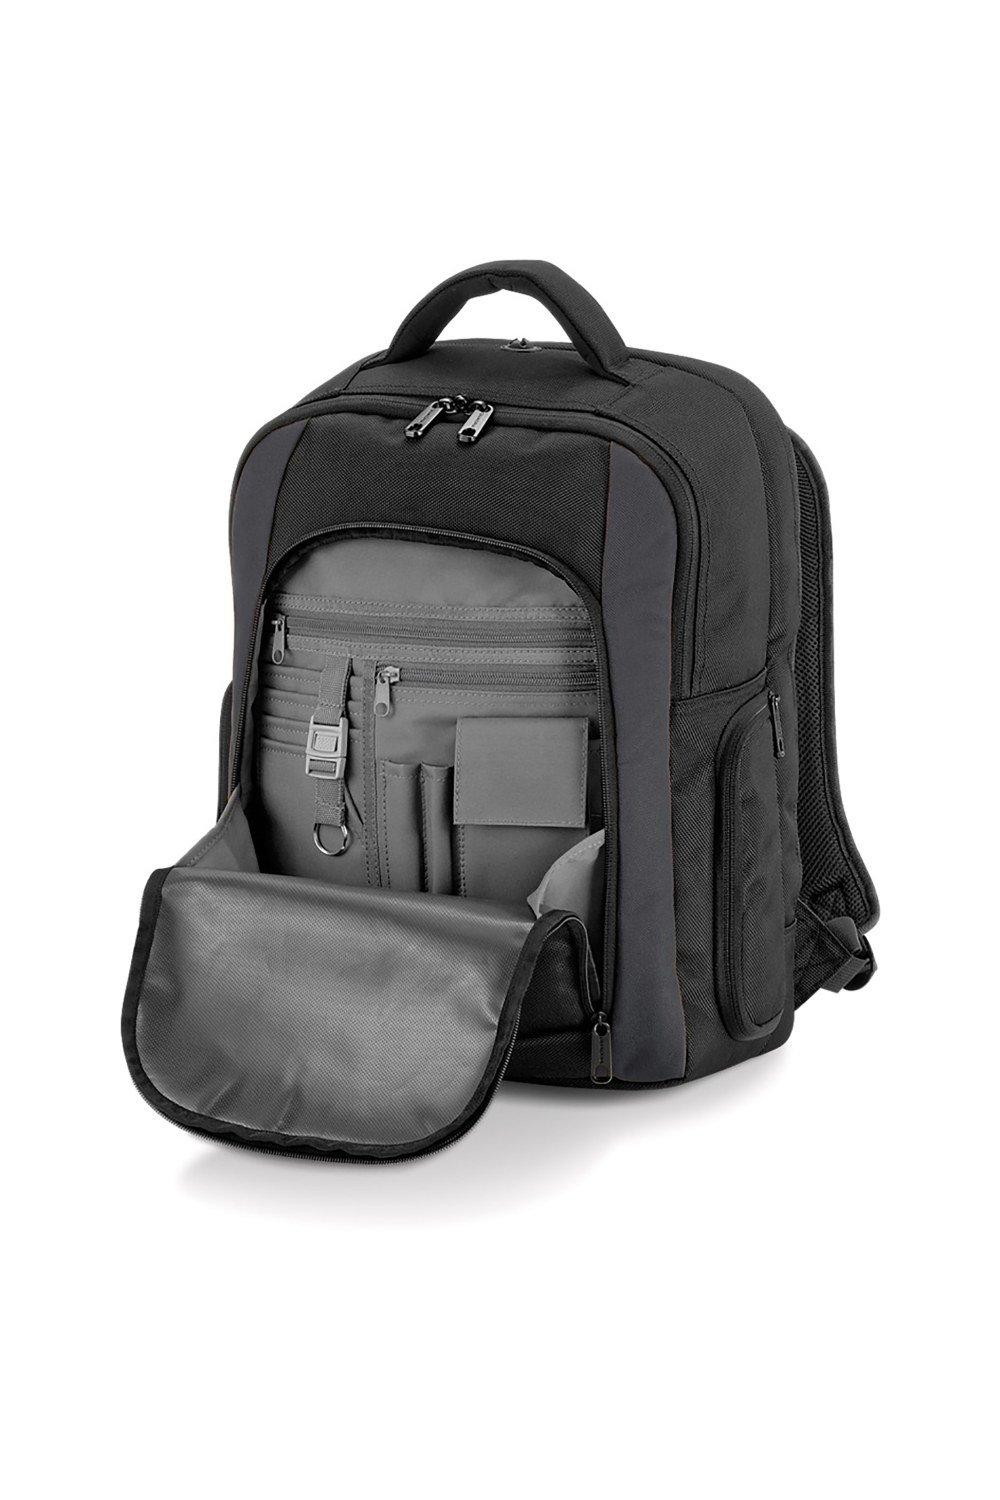 Tungsten Laptop Backpack - 23 Litres